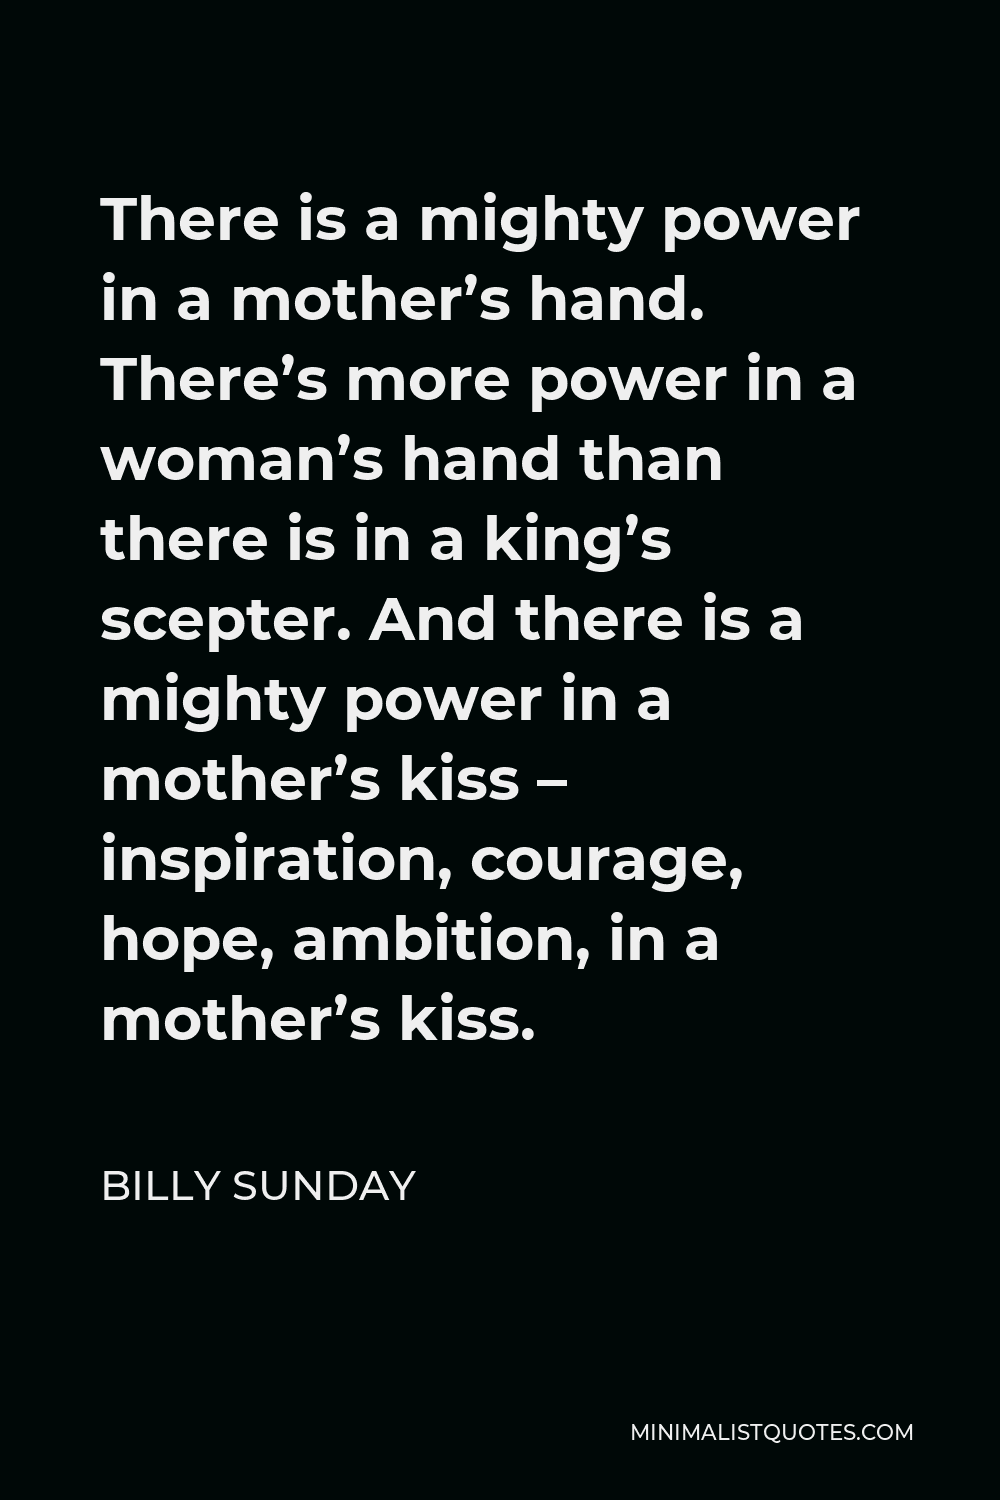 Billy Sunday Quote - There is a mighty power in a mother’s hand. There’s more power in a woman’s hand than there is in a king’s scepter. And there is a mighty power in a mother’s kiss – inspiration, courage, hope, ambition, in a mother’s kiss.